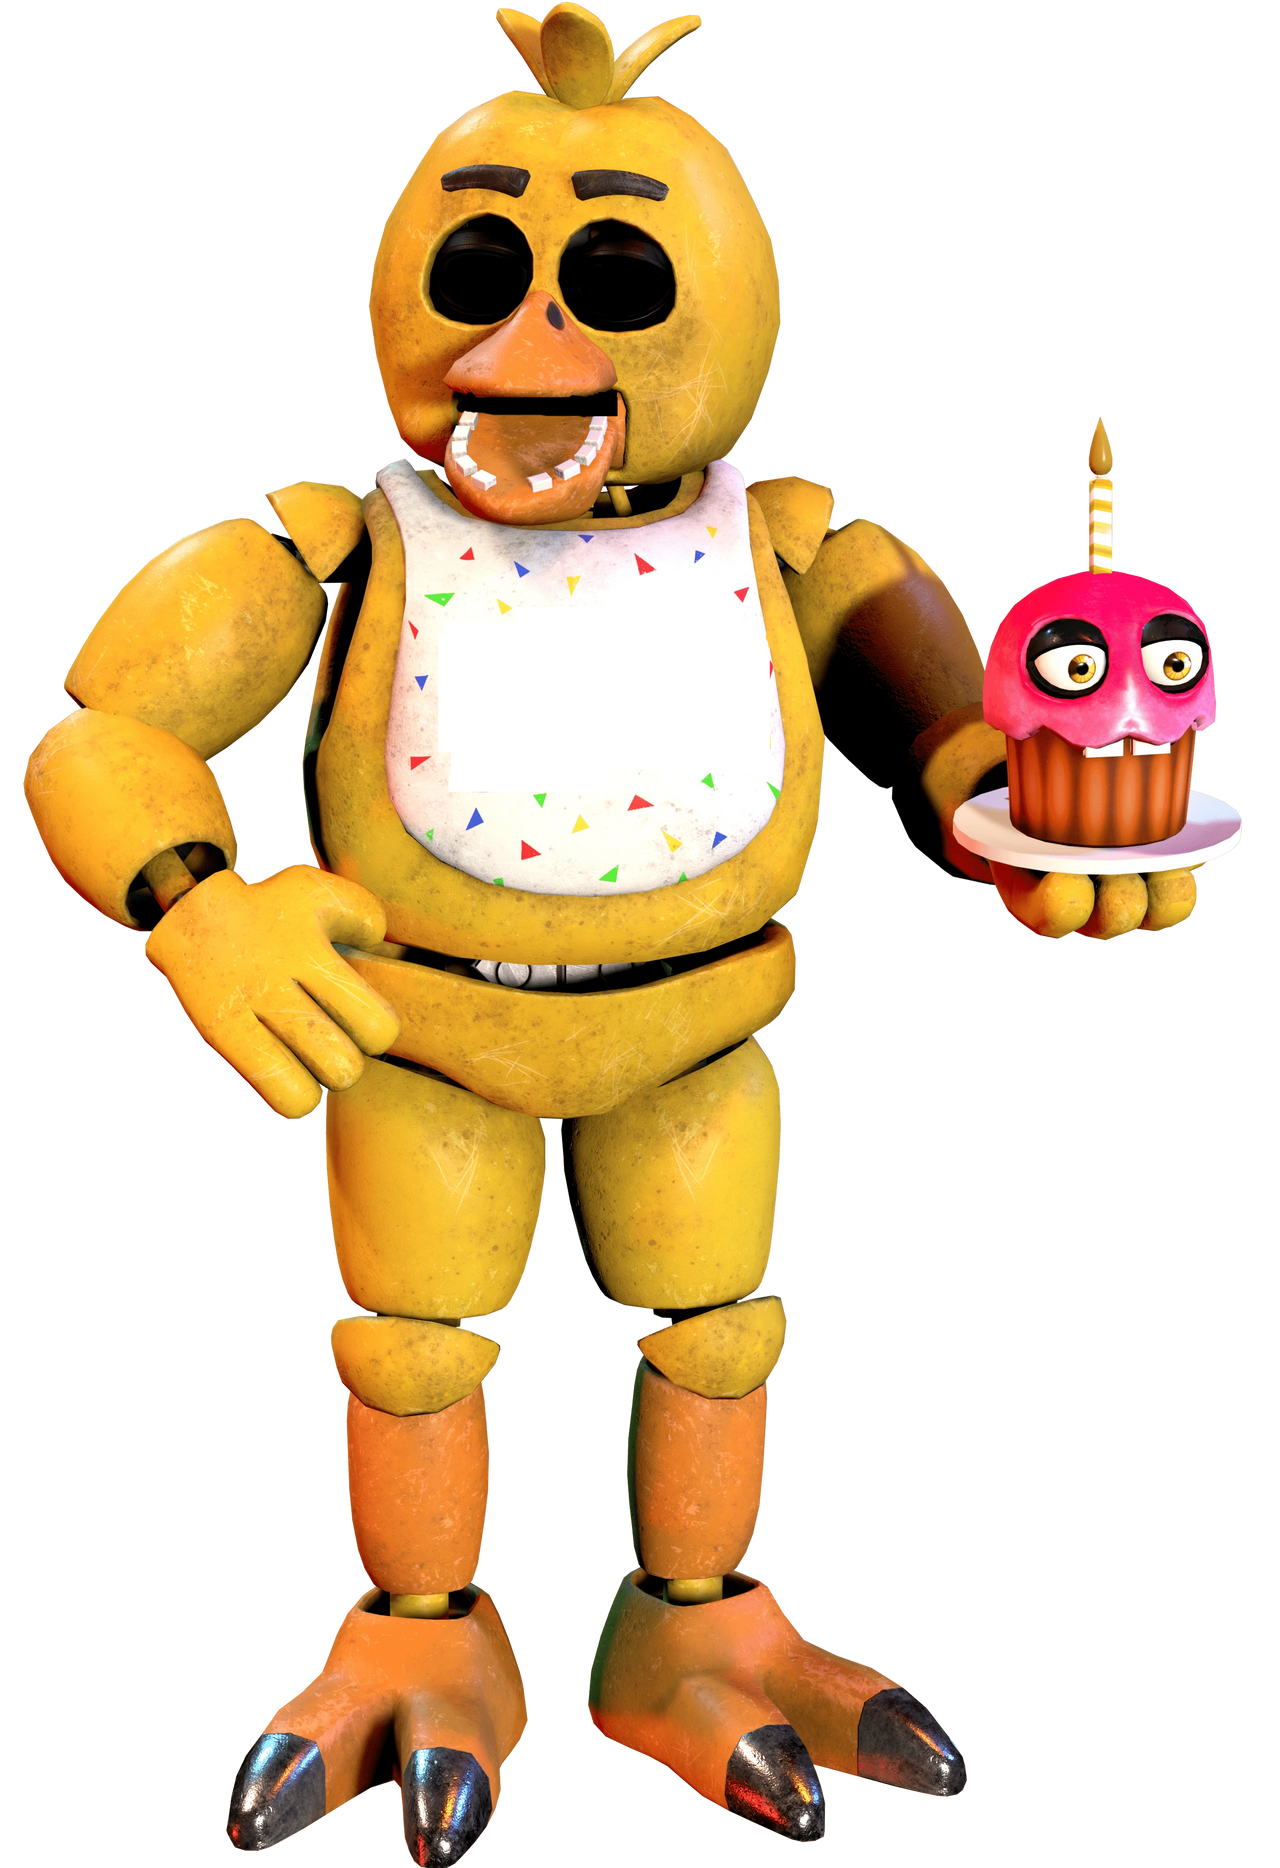 Events, Five Nights at Freddys AR Wiki